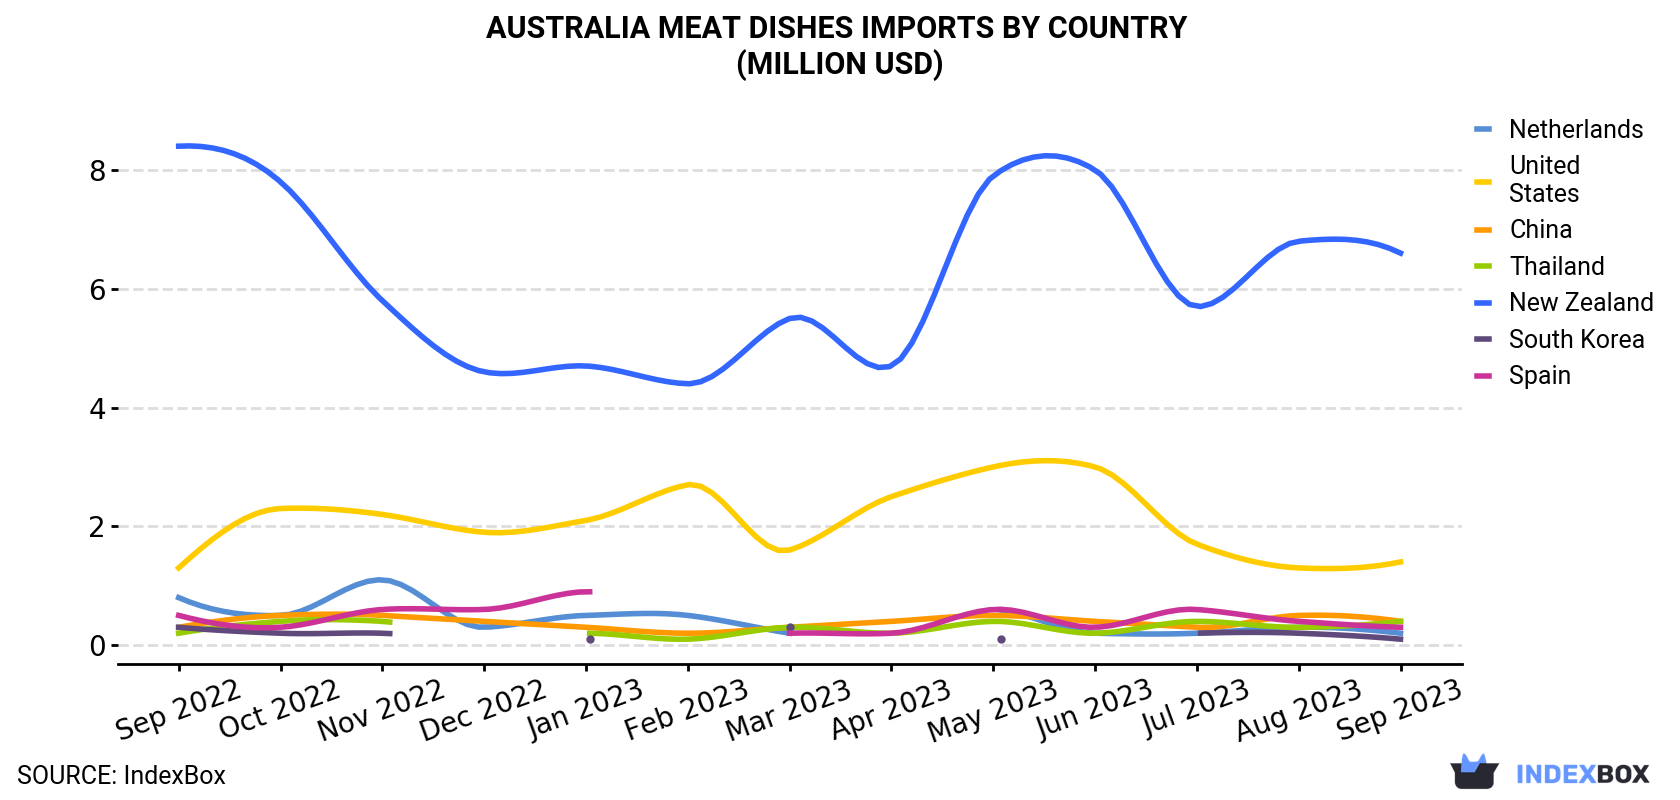 Australia Meat Dishes Imports By Country (Million USD)